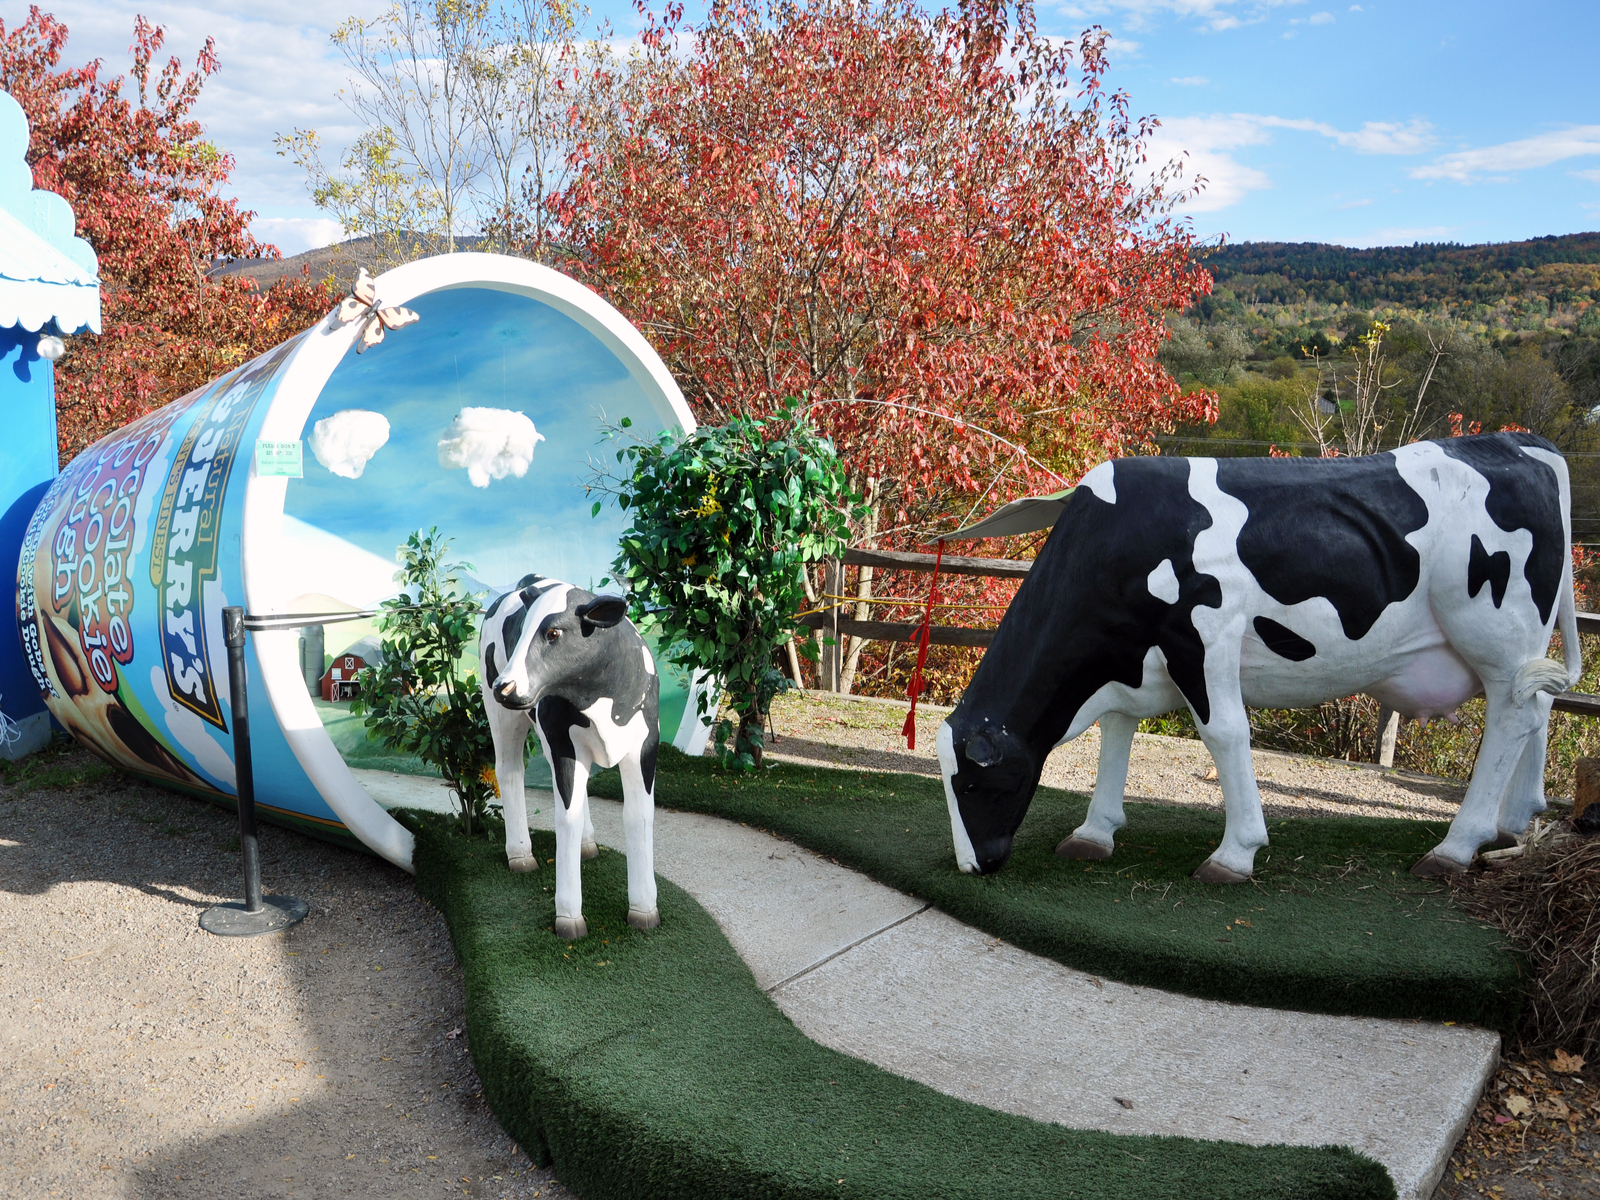 Outside of the Ben and Jerry’s Factory Tour, one of the best places to visit in Vermont